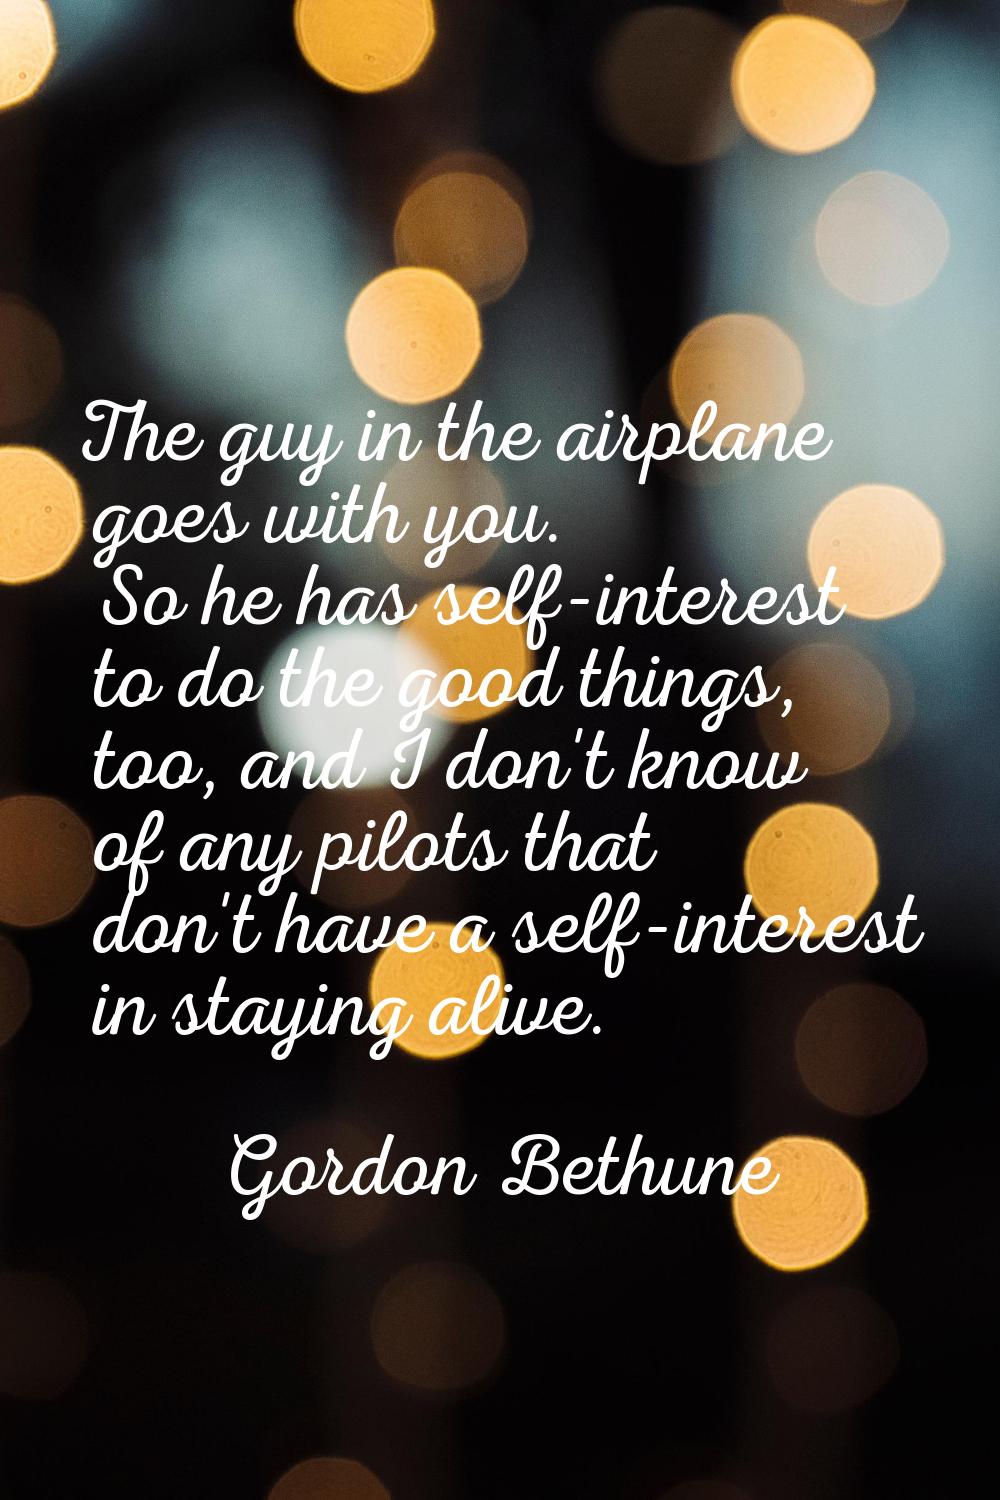 The guy in the airplane goes with you. So he has self-interest to do the good things, too, and I do